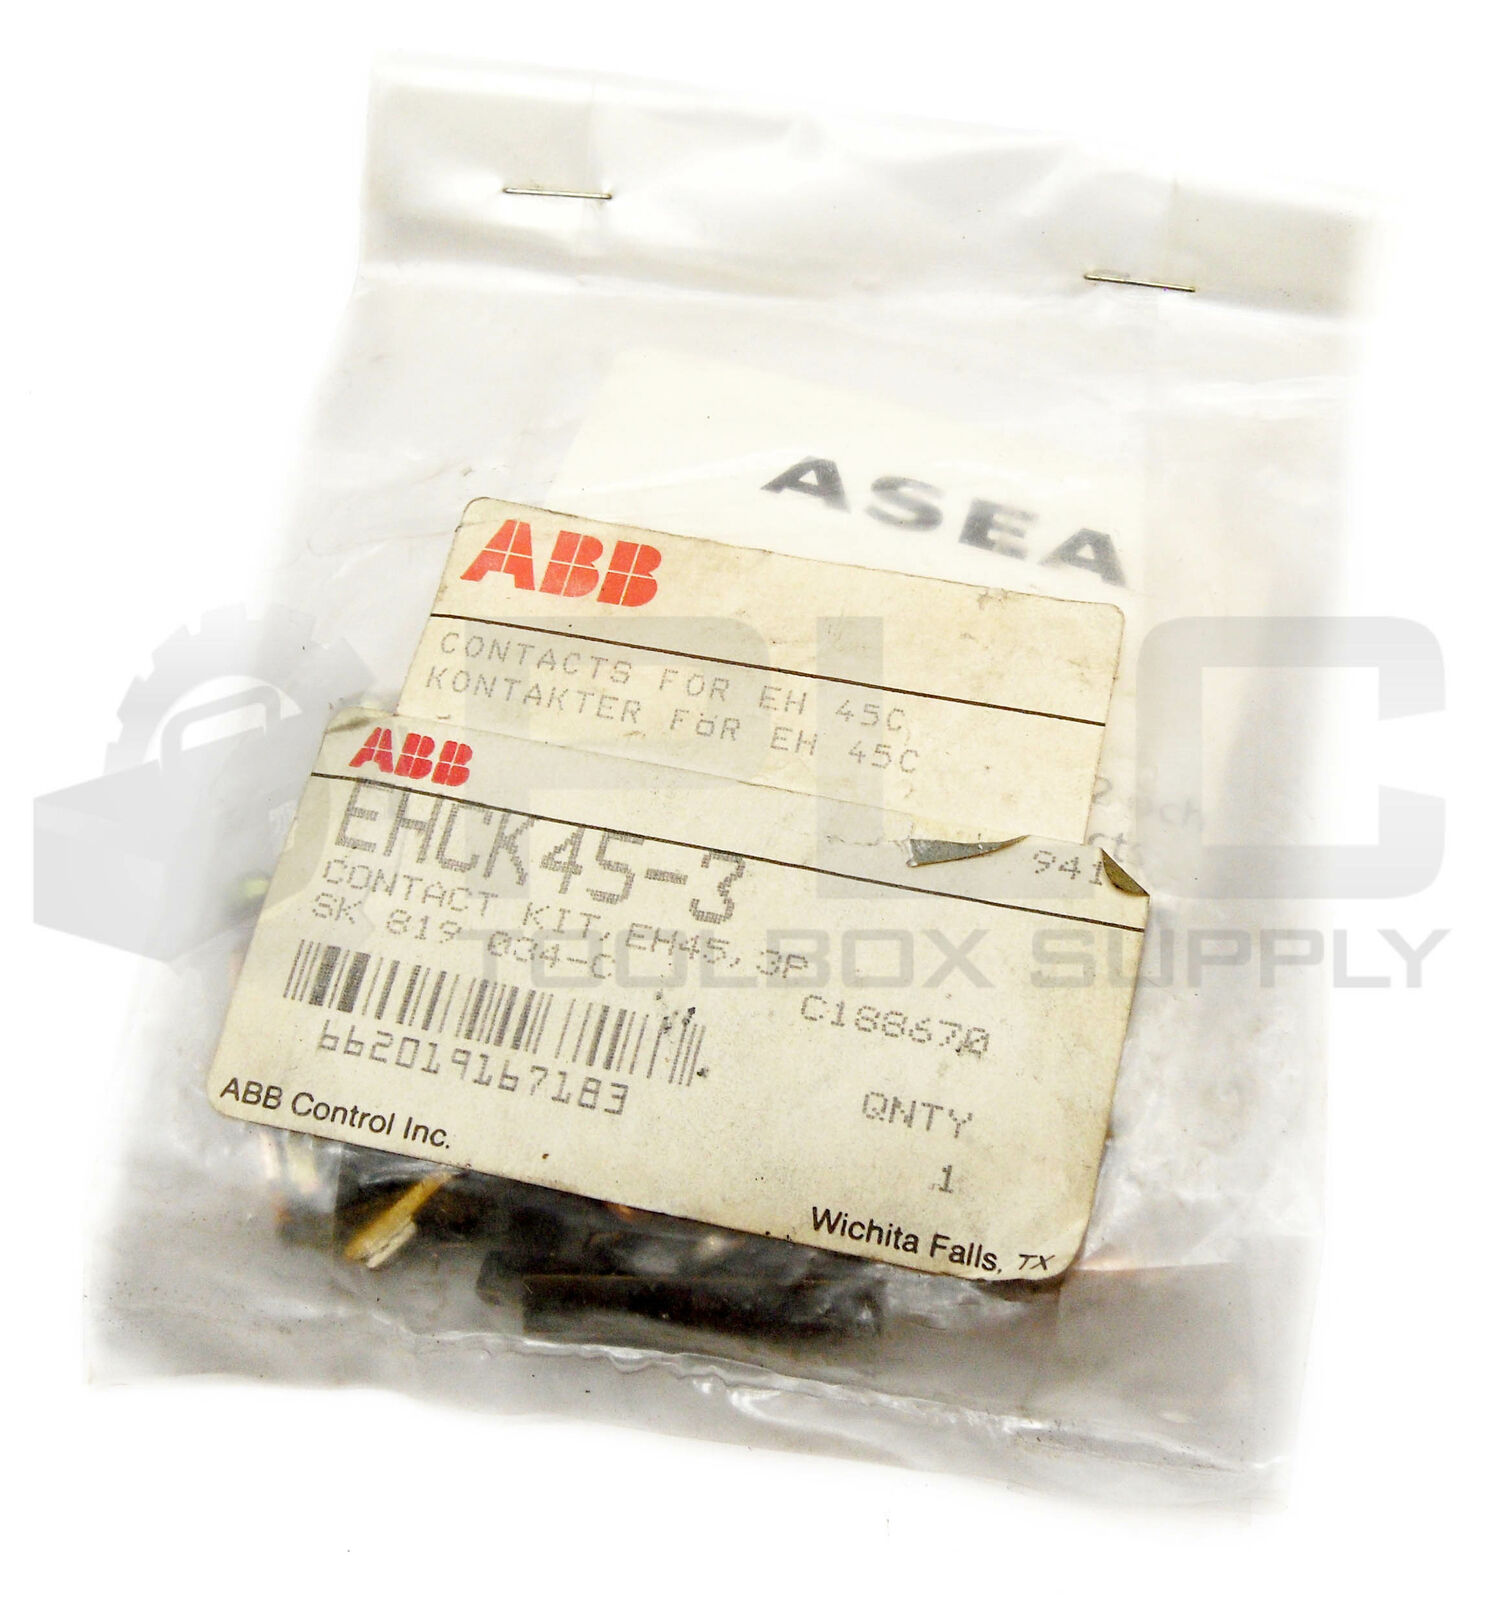 NEW SEALED ABB EHCK45-3 CONTACT KIT EH45 3 POLE SK 819 034-C